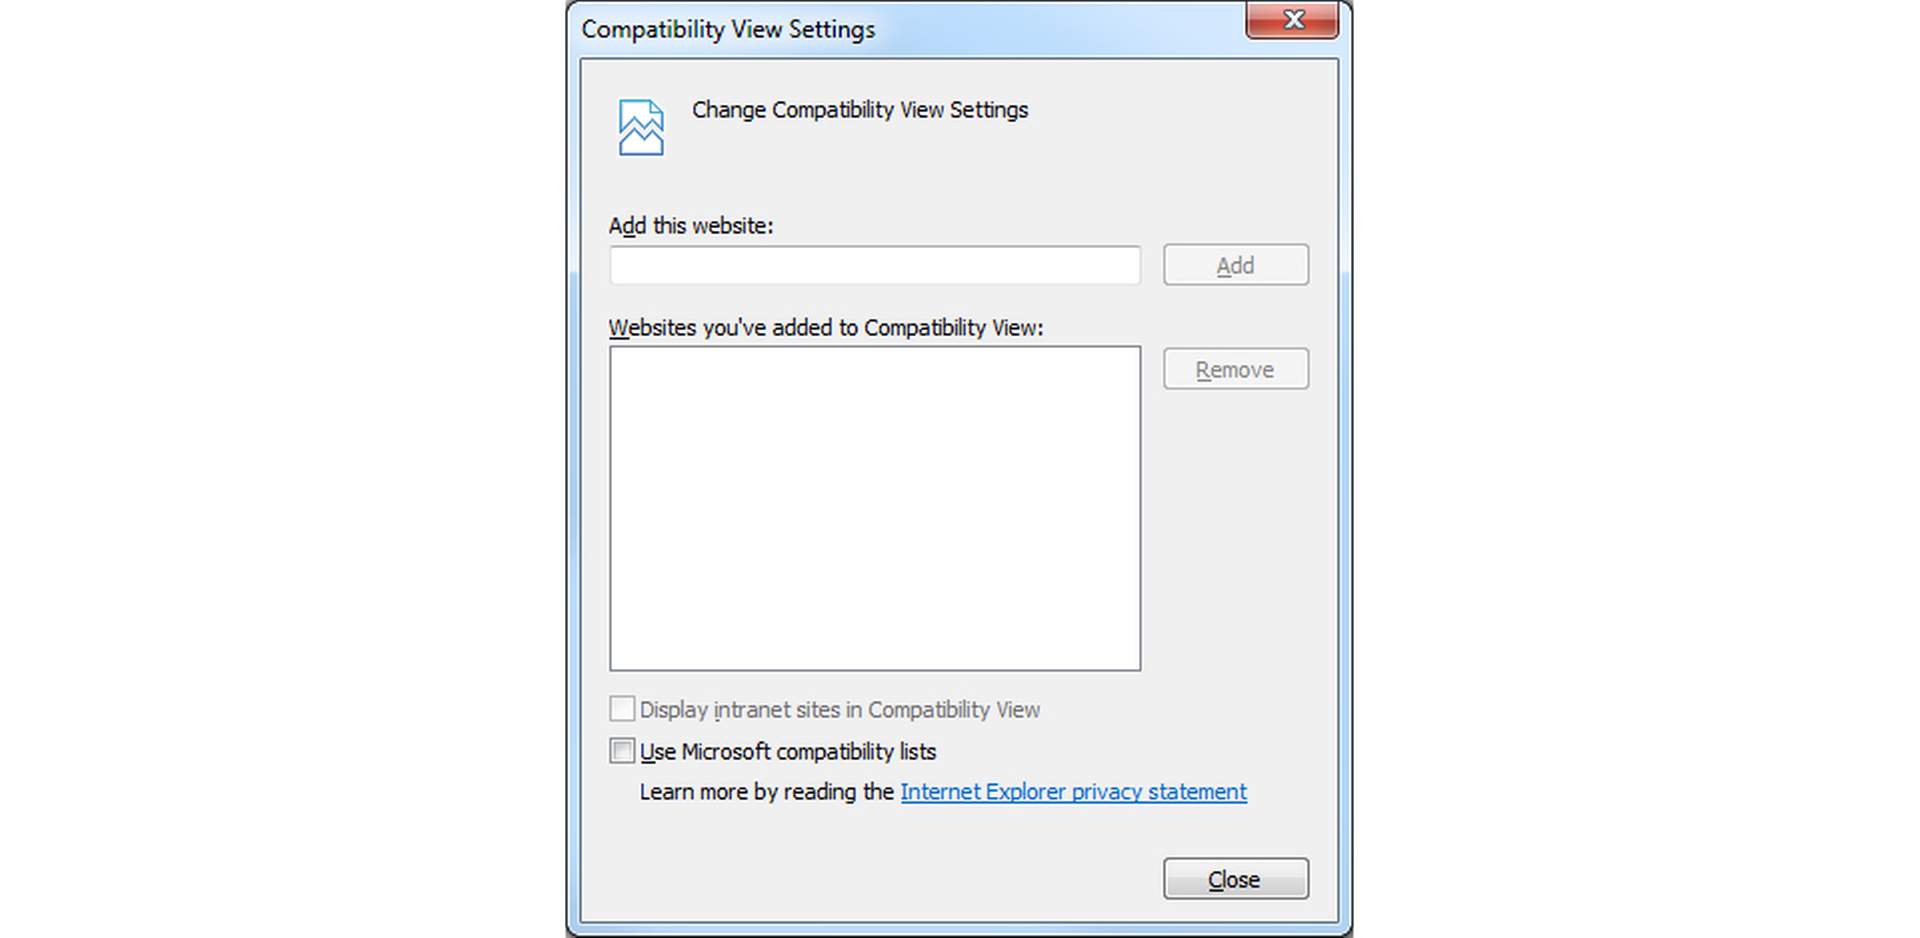 Compatibility View Settings 